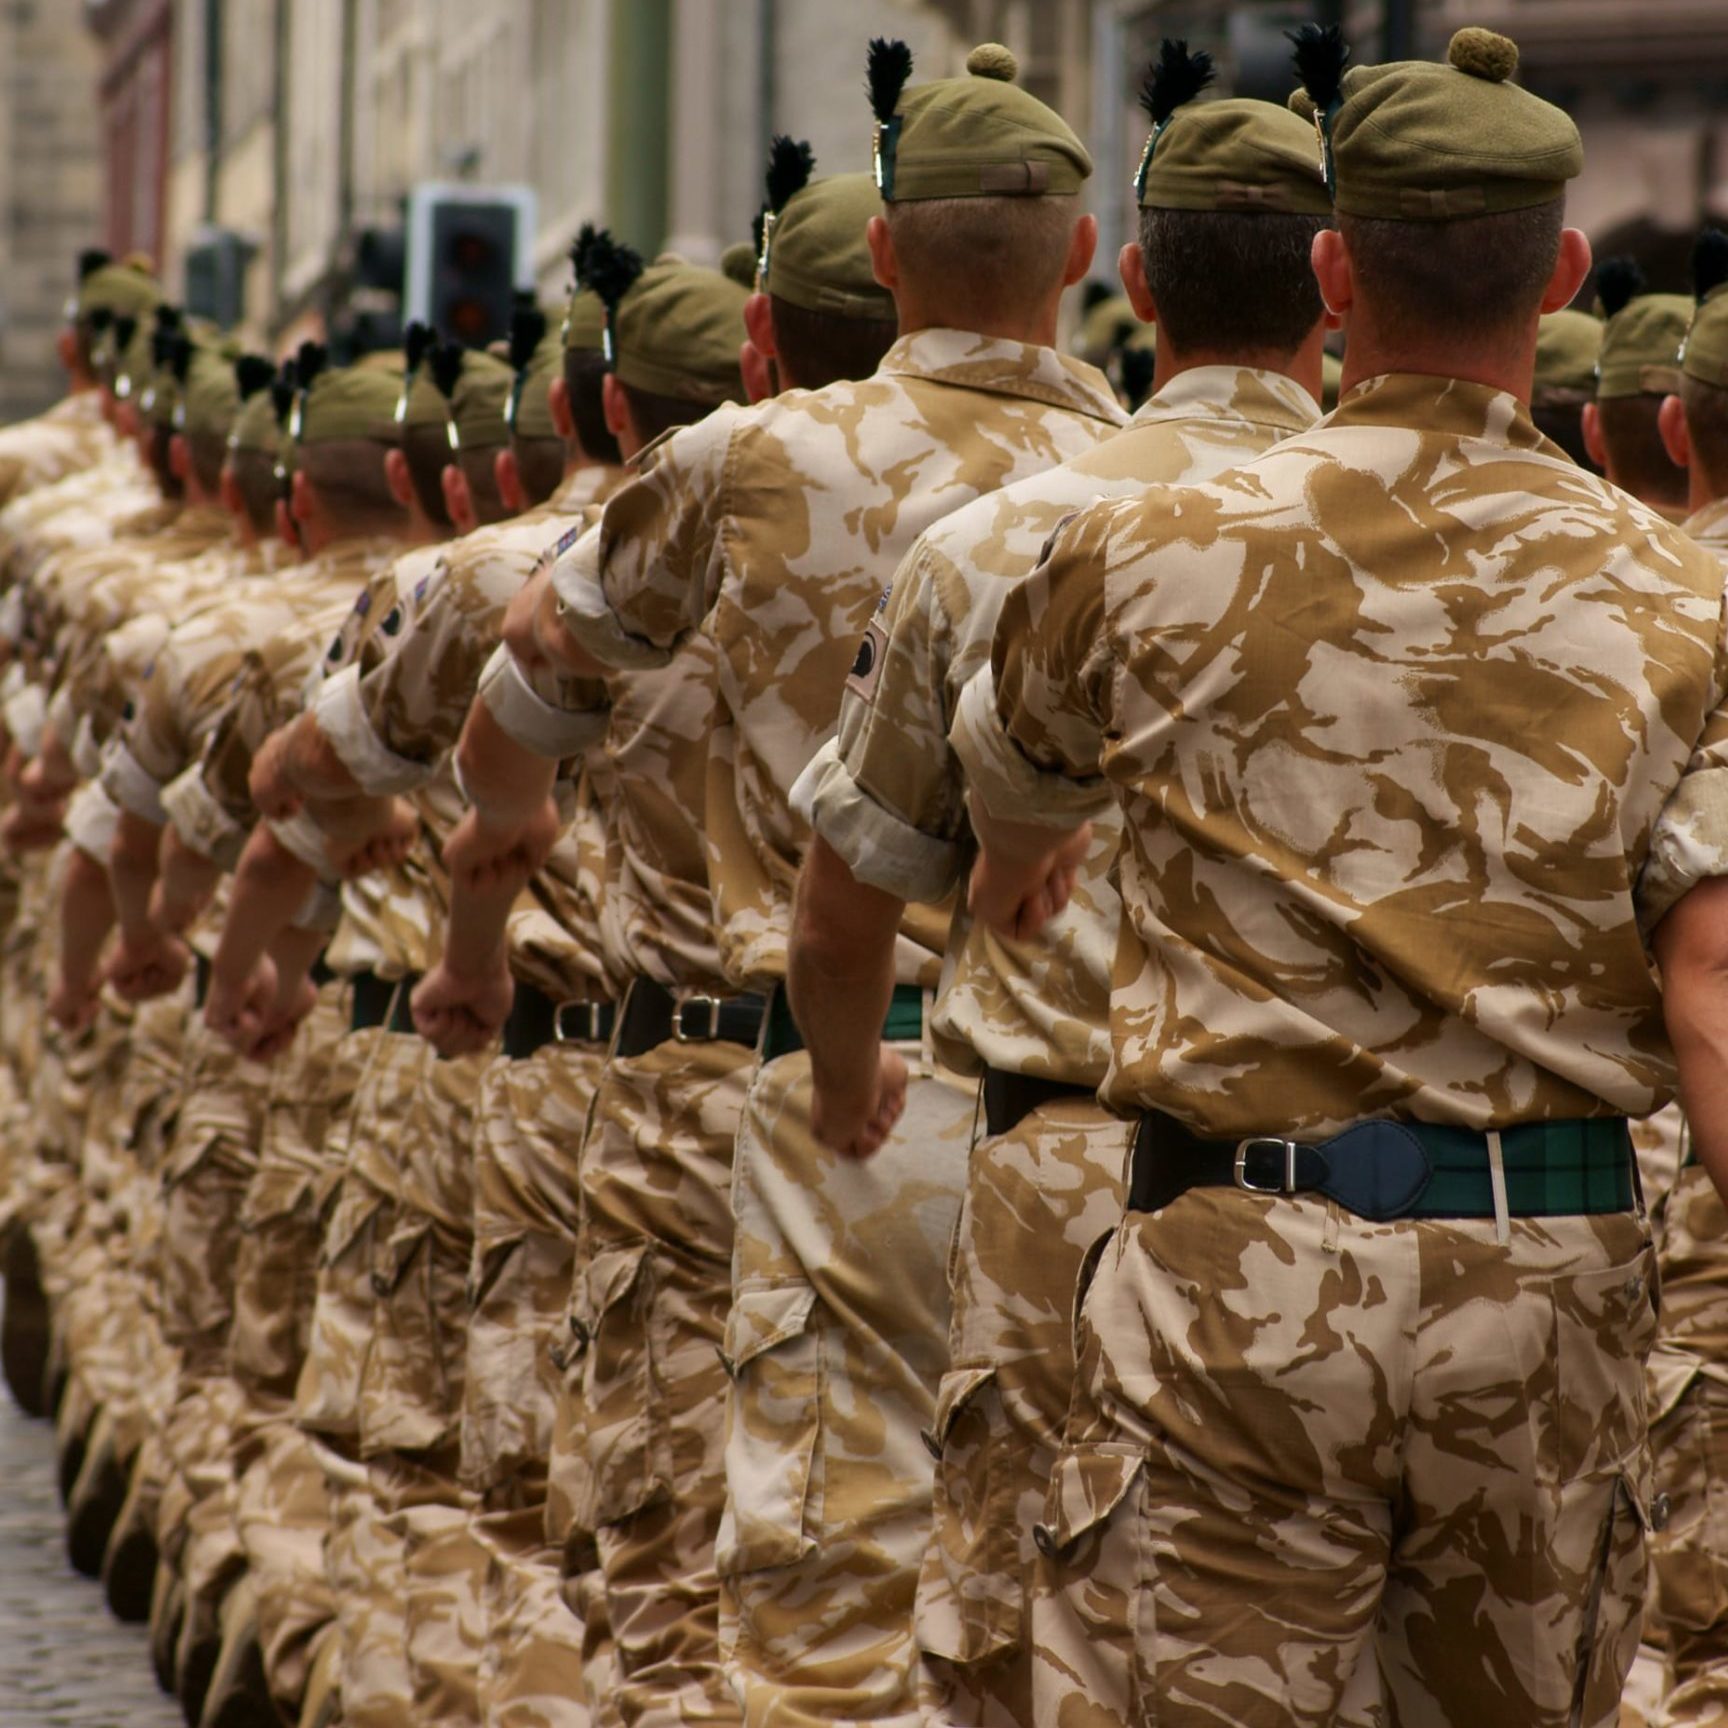 Group of military men marching